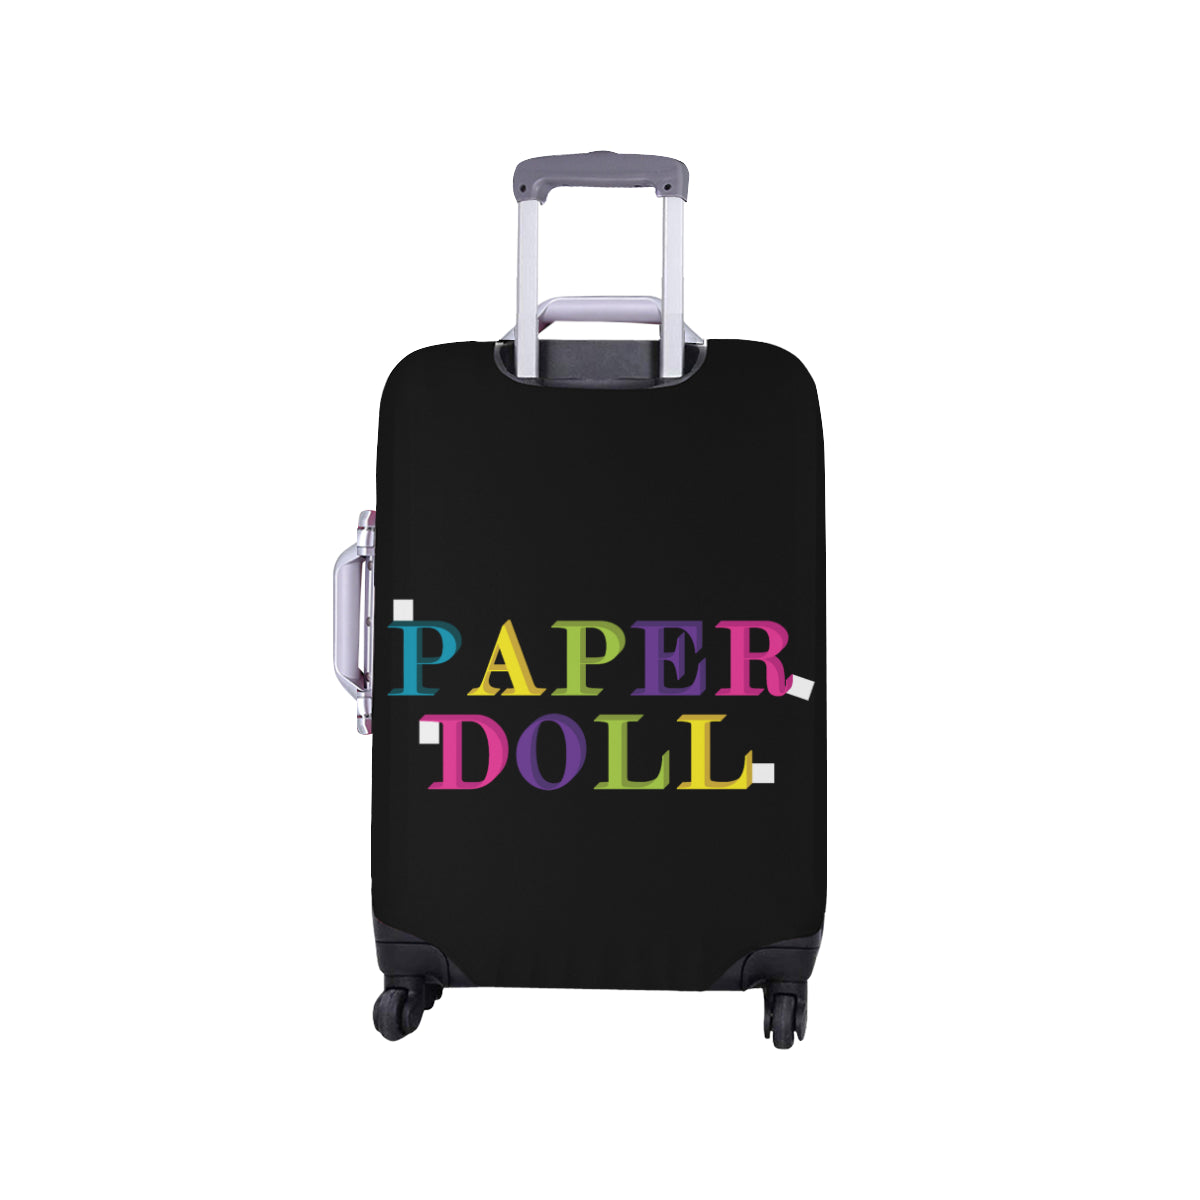 PAPER DOLL PURSE LUGGAGE COVER - SMALL